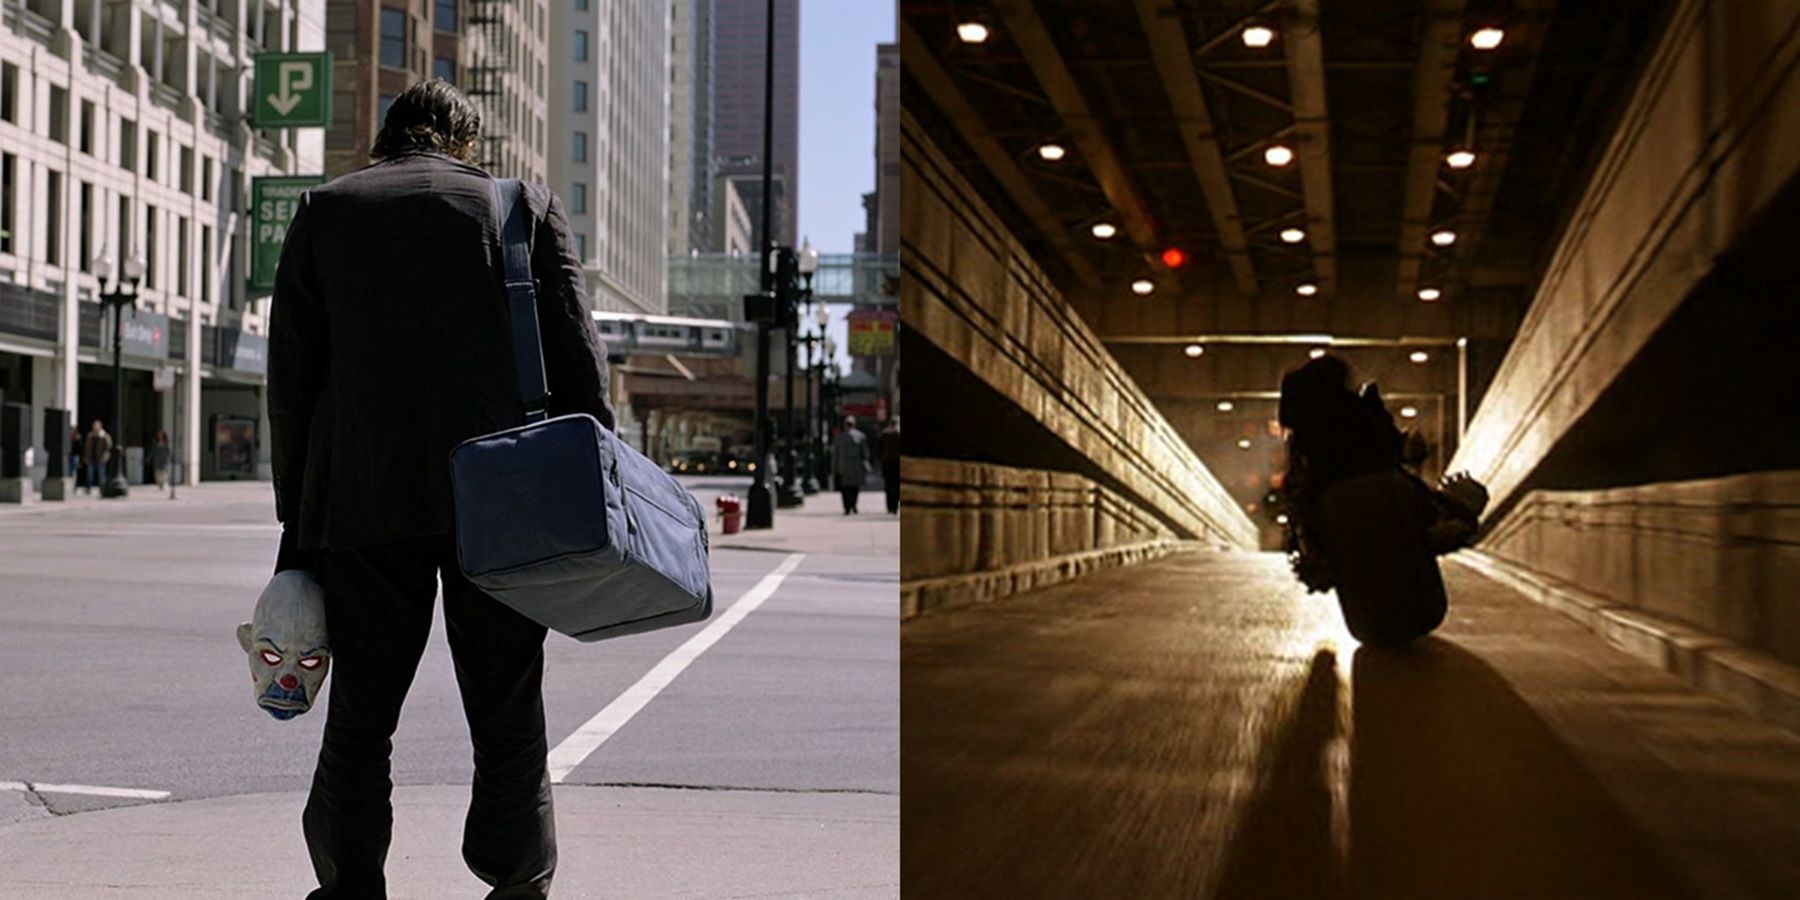 The opening and closing scenes of The Dark Knight